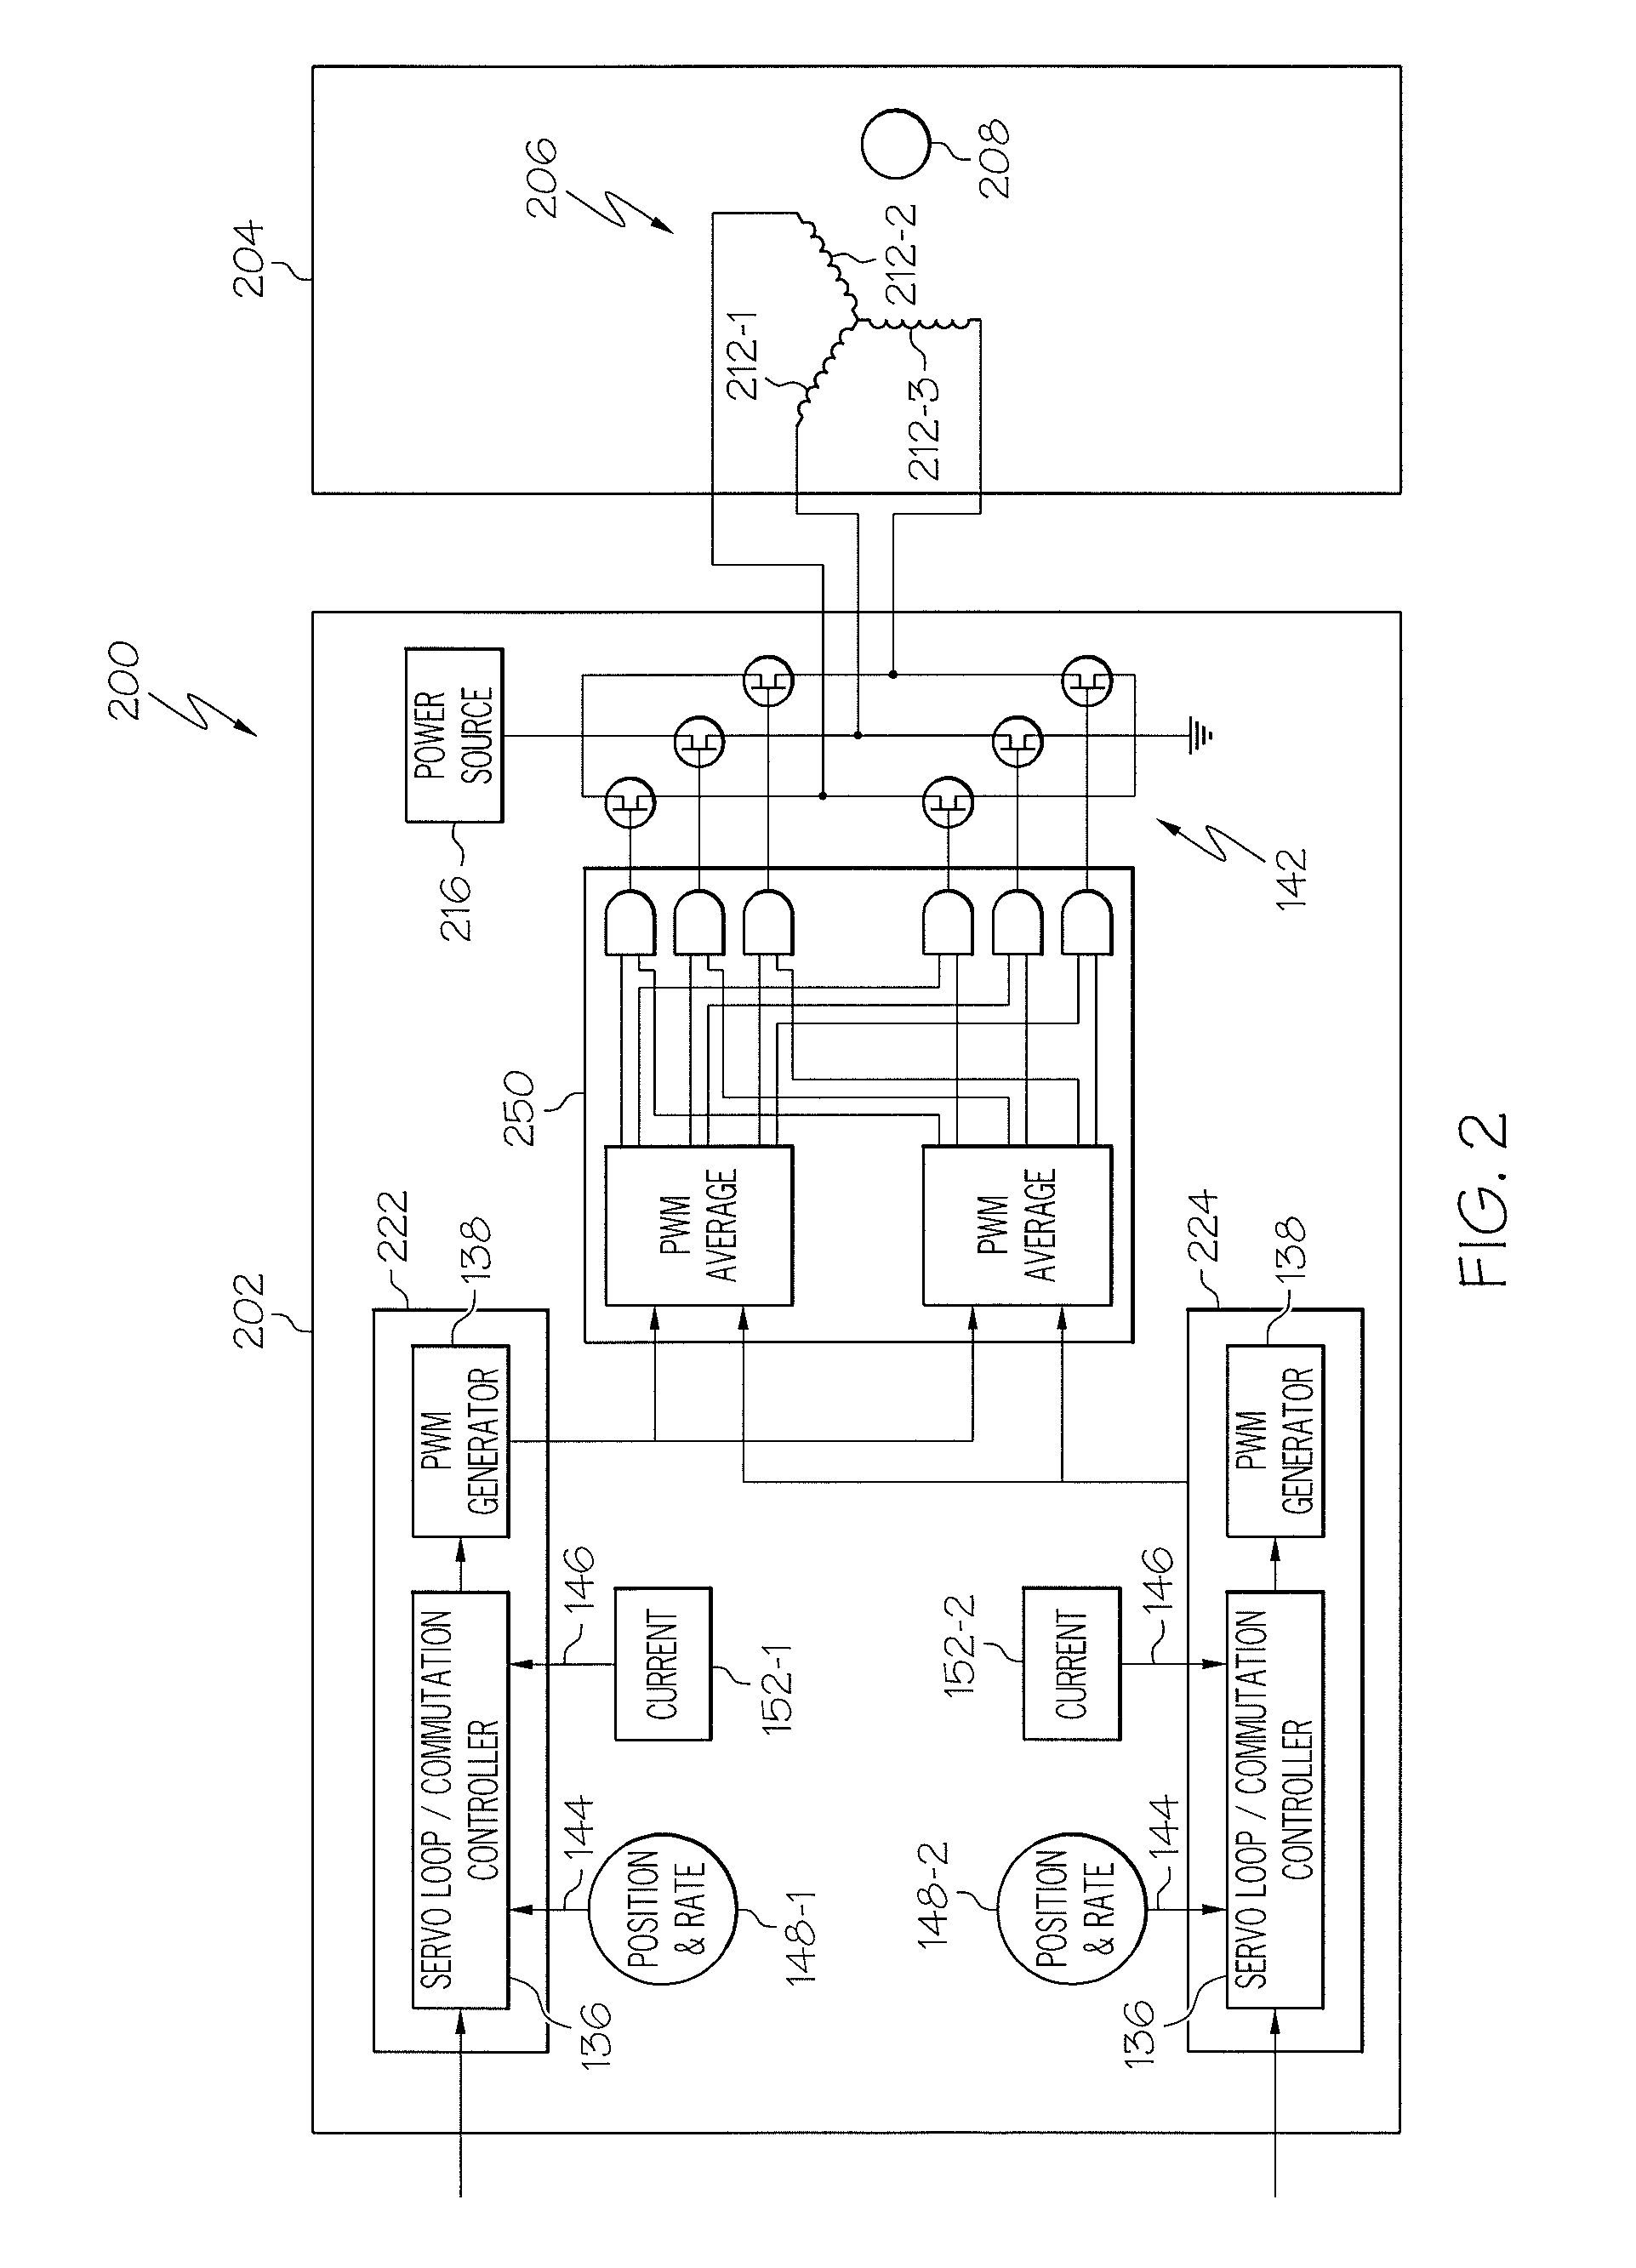 Dual lane control of a permanent magnet brushless motor using non-trapezoidal commutation control